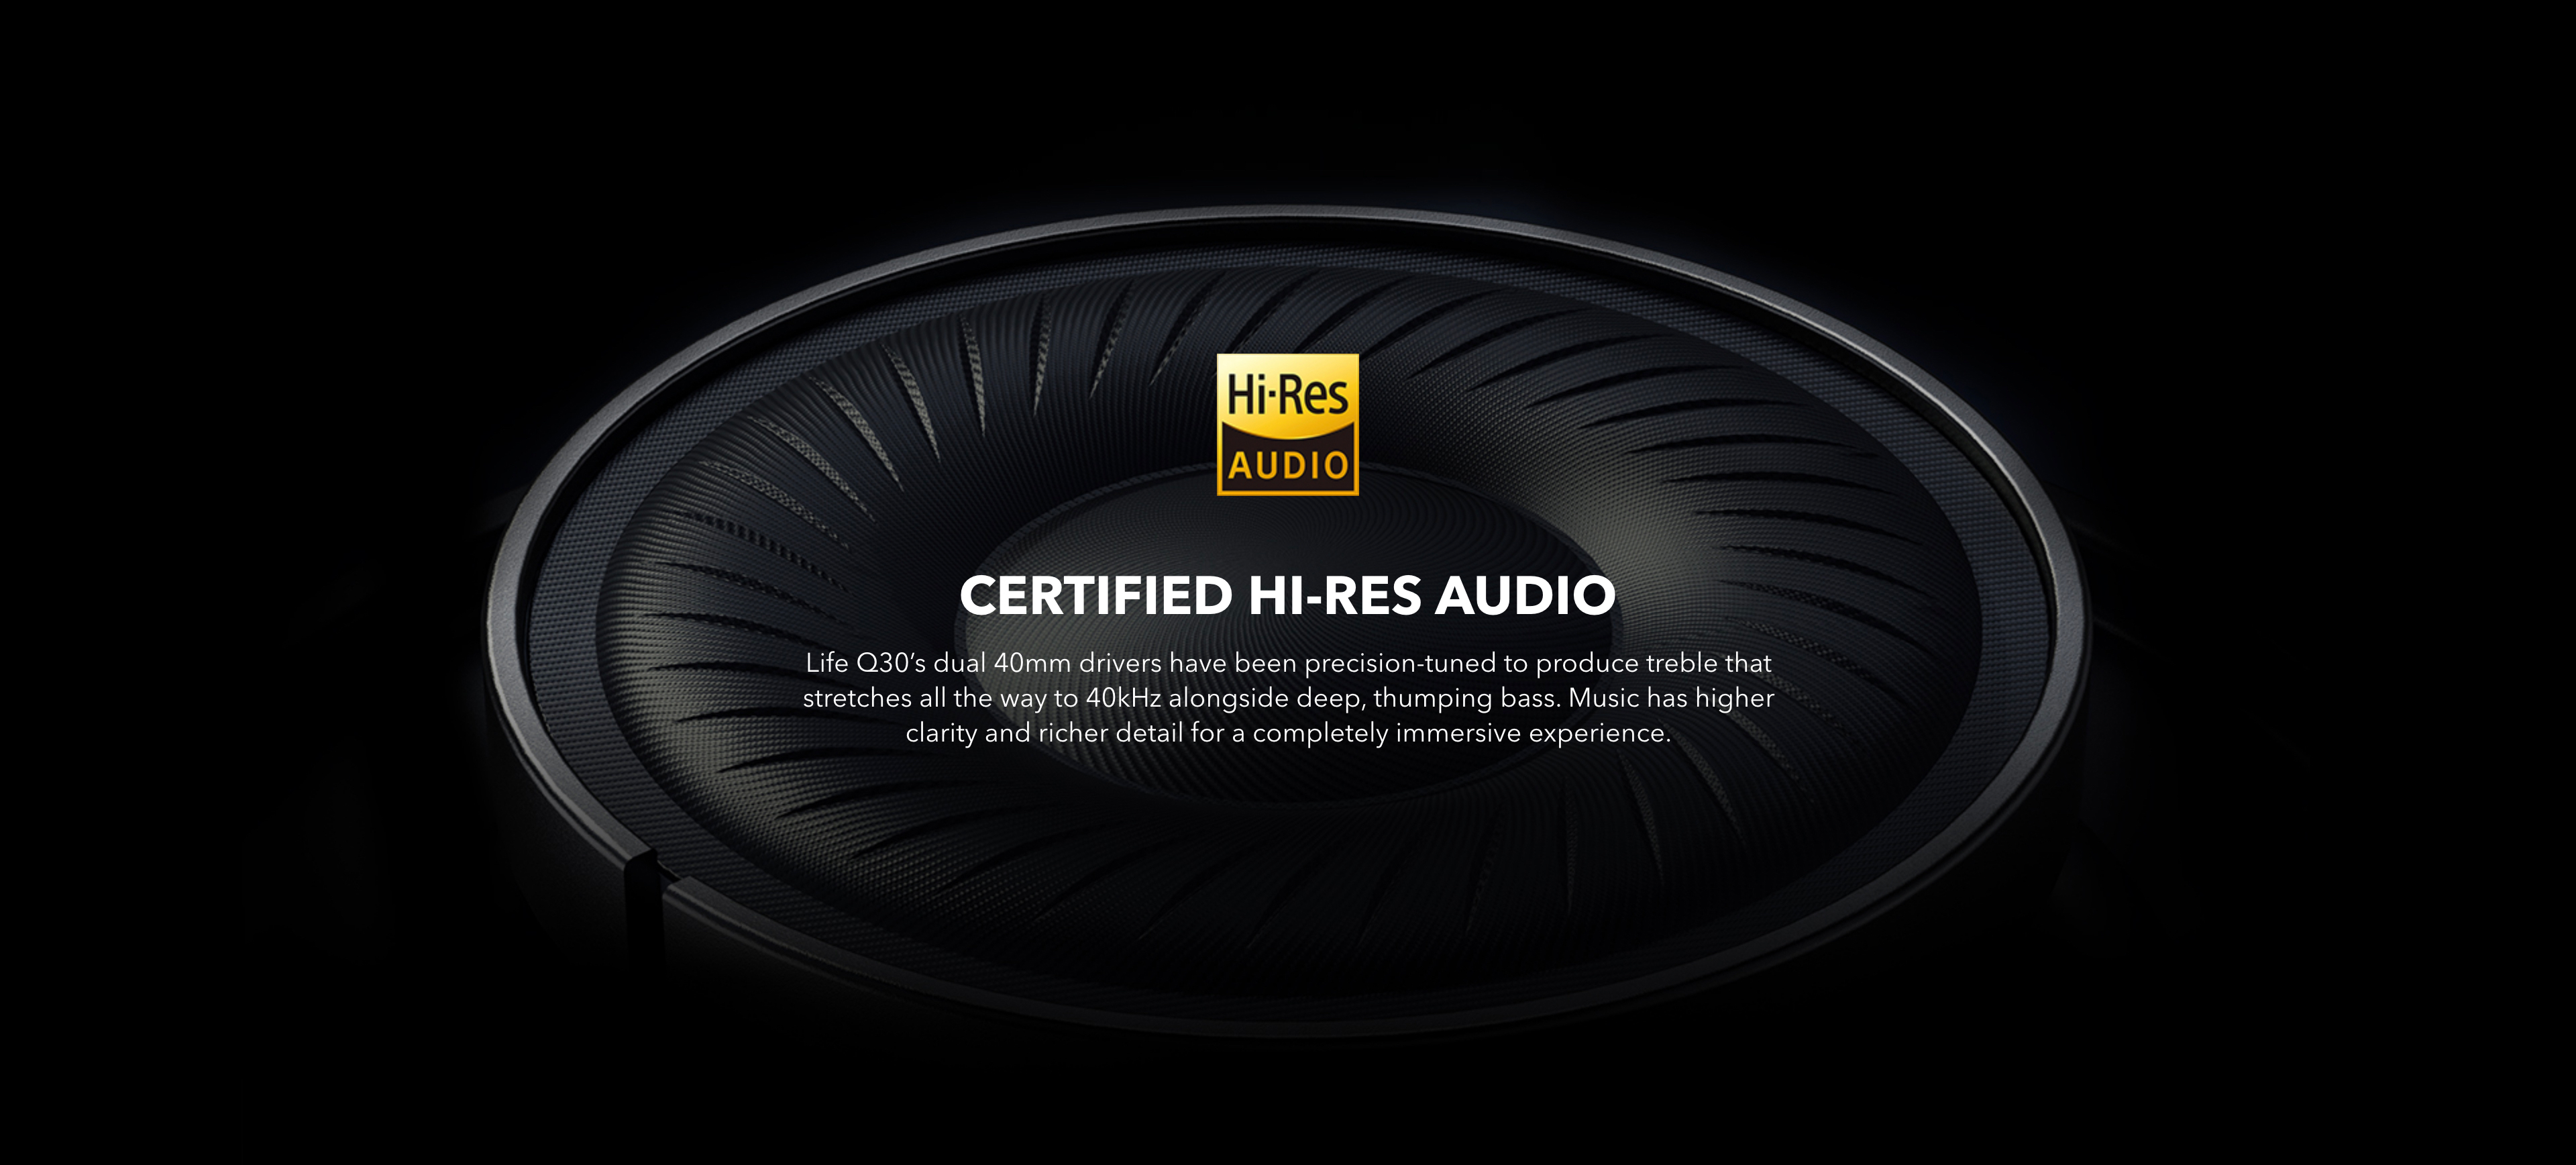 Certified Hi-Res Audio
Life Q30’s dual 40mm drivers have been precision-tuned to produce treble that stretches all the way to 40kHz alongside deep, thumping bass. The music has higher clarity and richer detail for a completely immersive experience.